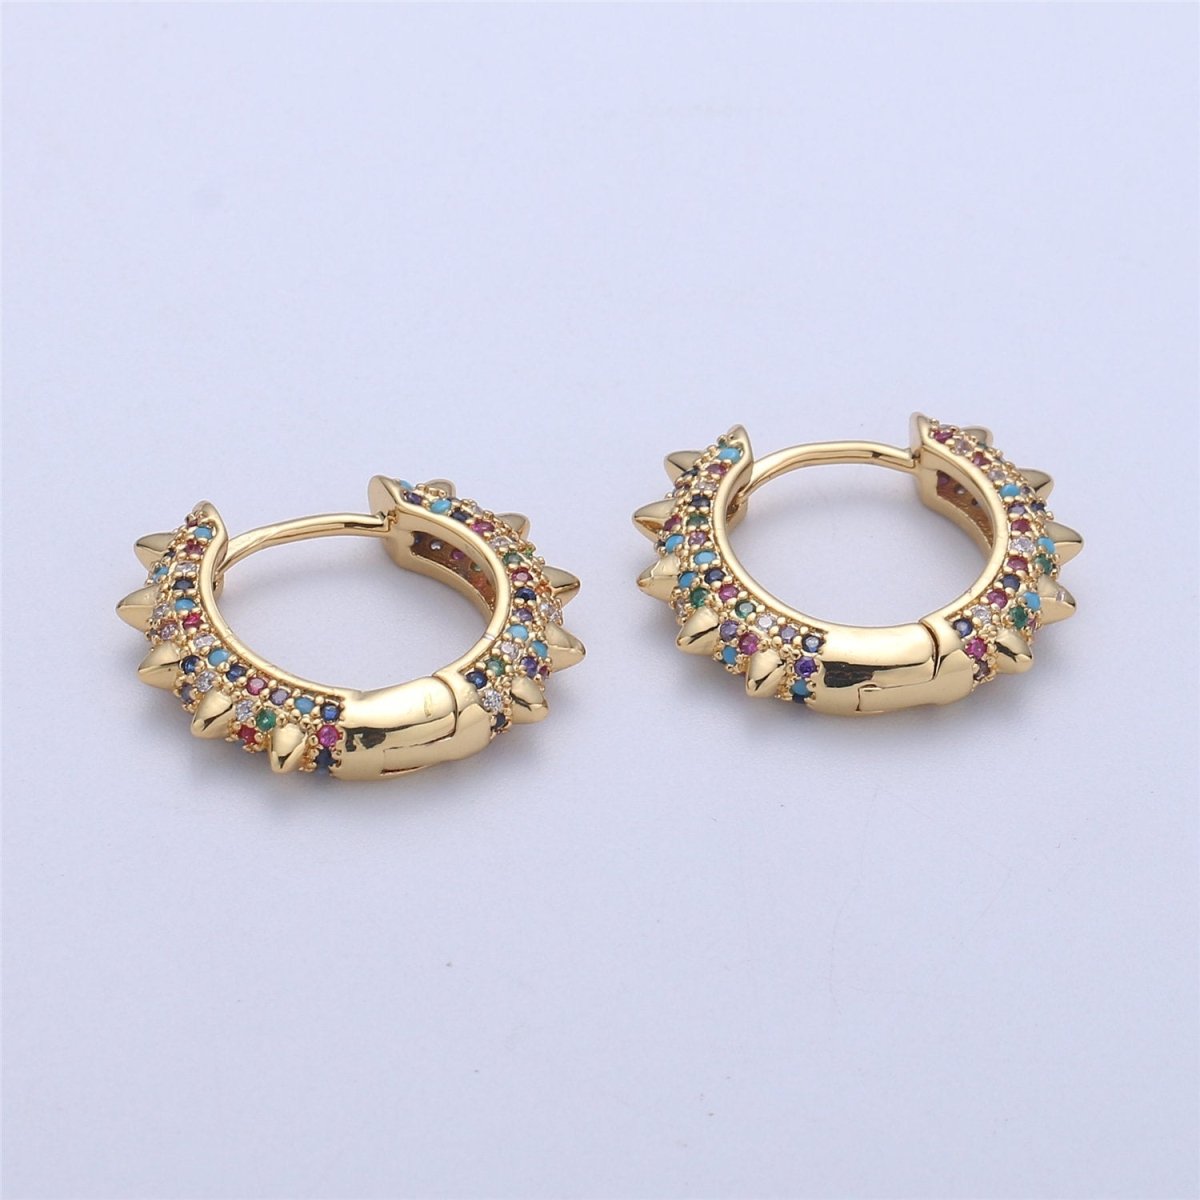 Spike earrings Micro Pave Spike hoops Gold spike earrings Multi Color CZ Gold hoops Dainty Earring for everyday earring 20mm K-331 - DLUXCA